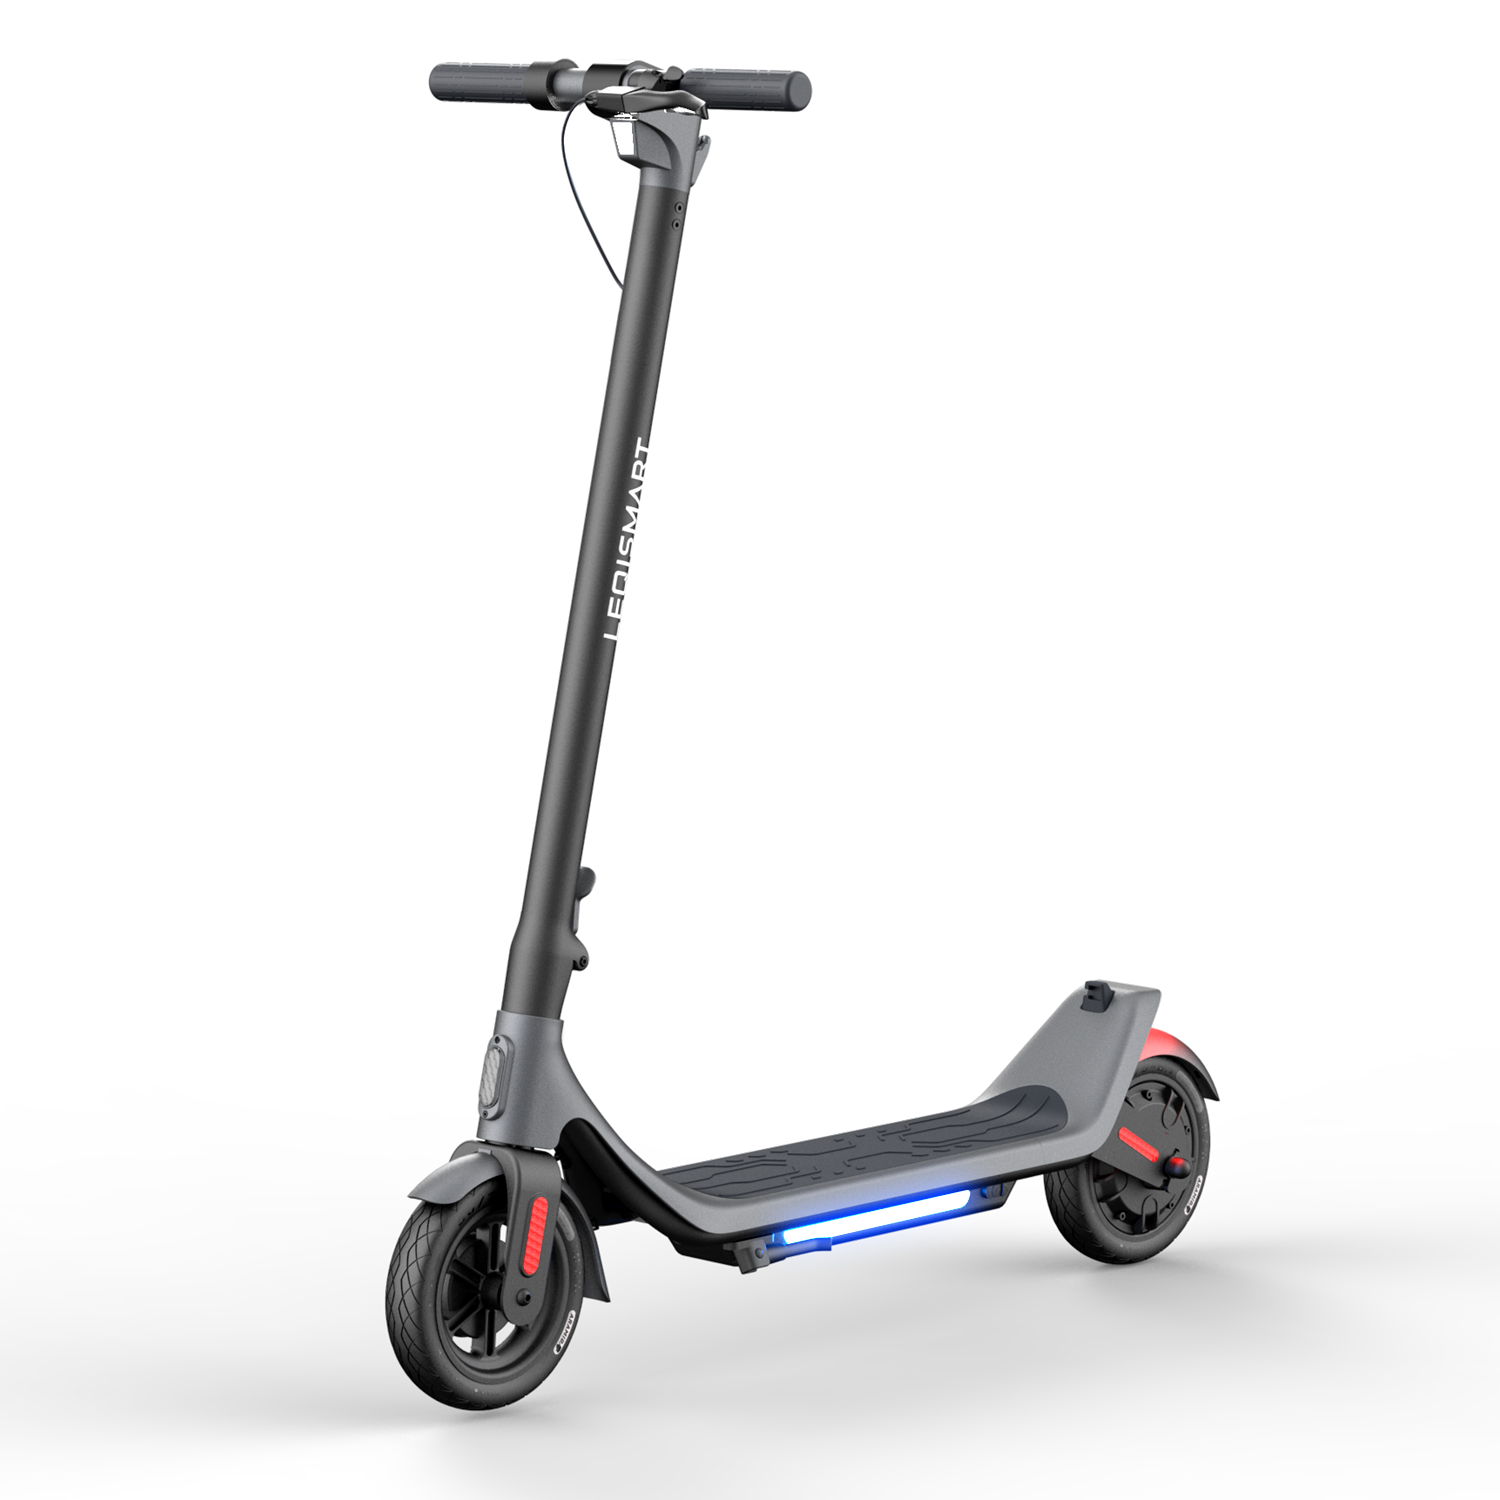 

[USA Direct] MEGAWHEELS A6L Electric Scooter 36V 5.2Ah Battery 250W Motor 9inch Tires 25KM/H Top Speed 25KM Mileage Rang